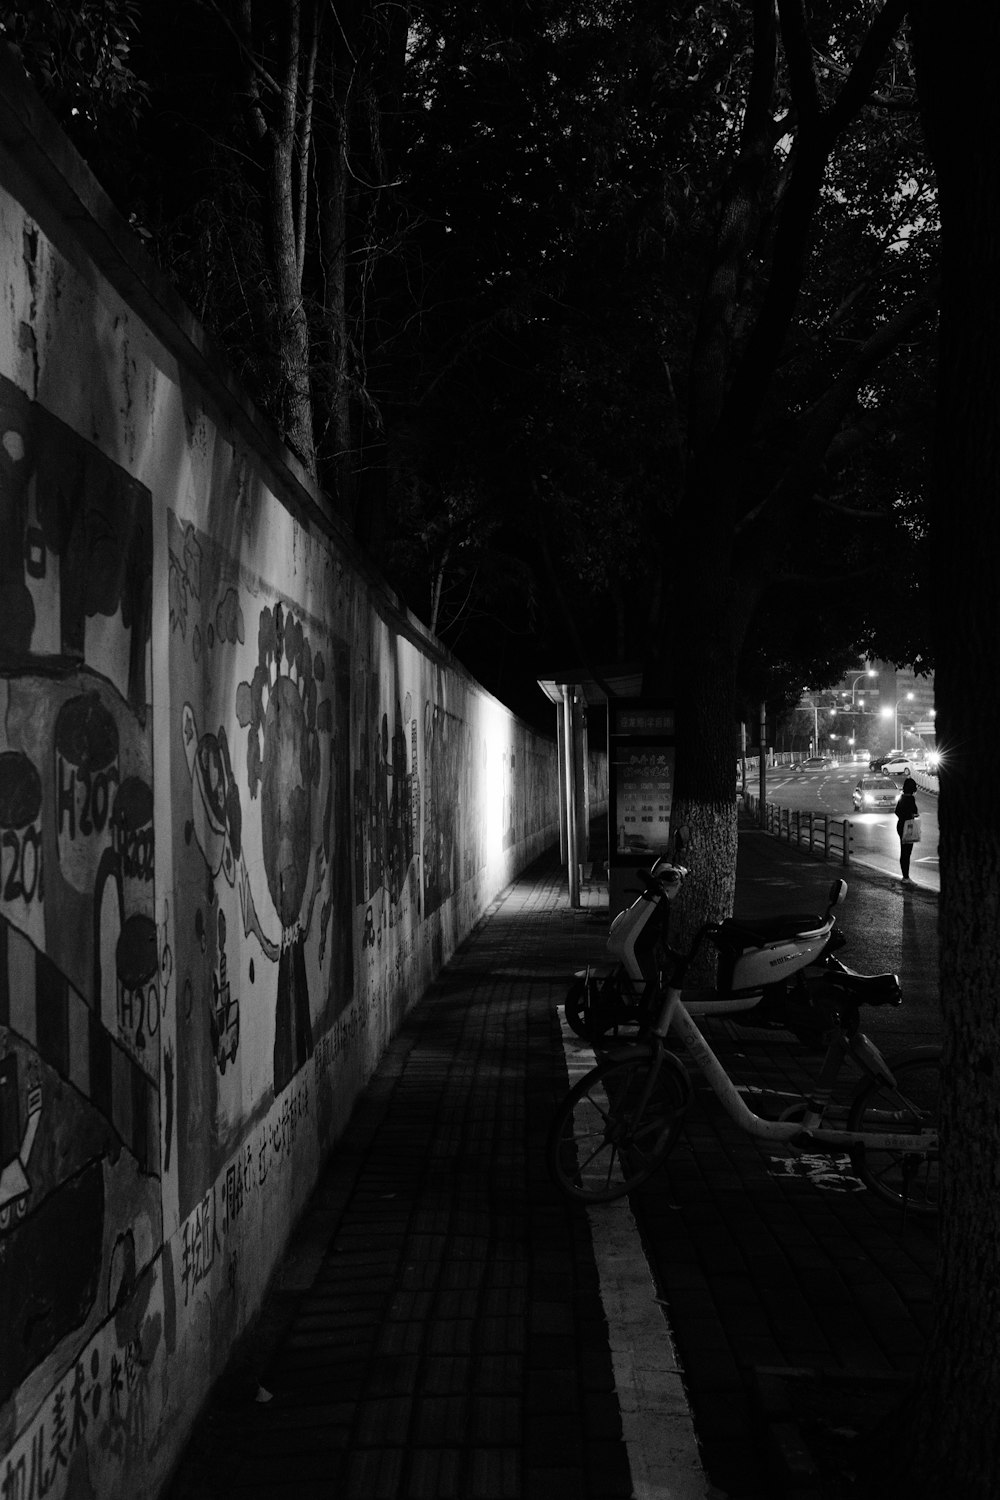 grayscale photo of man sitting on bench beside wall with graffiti